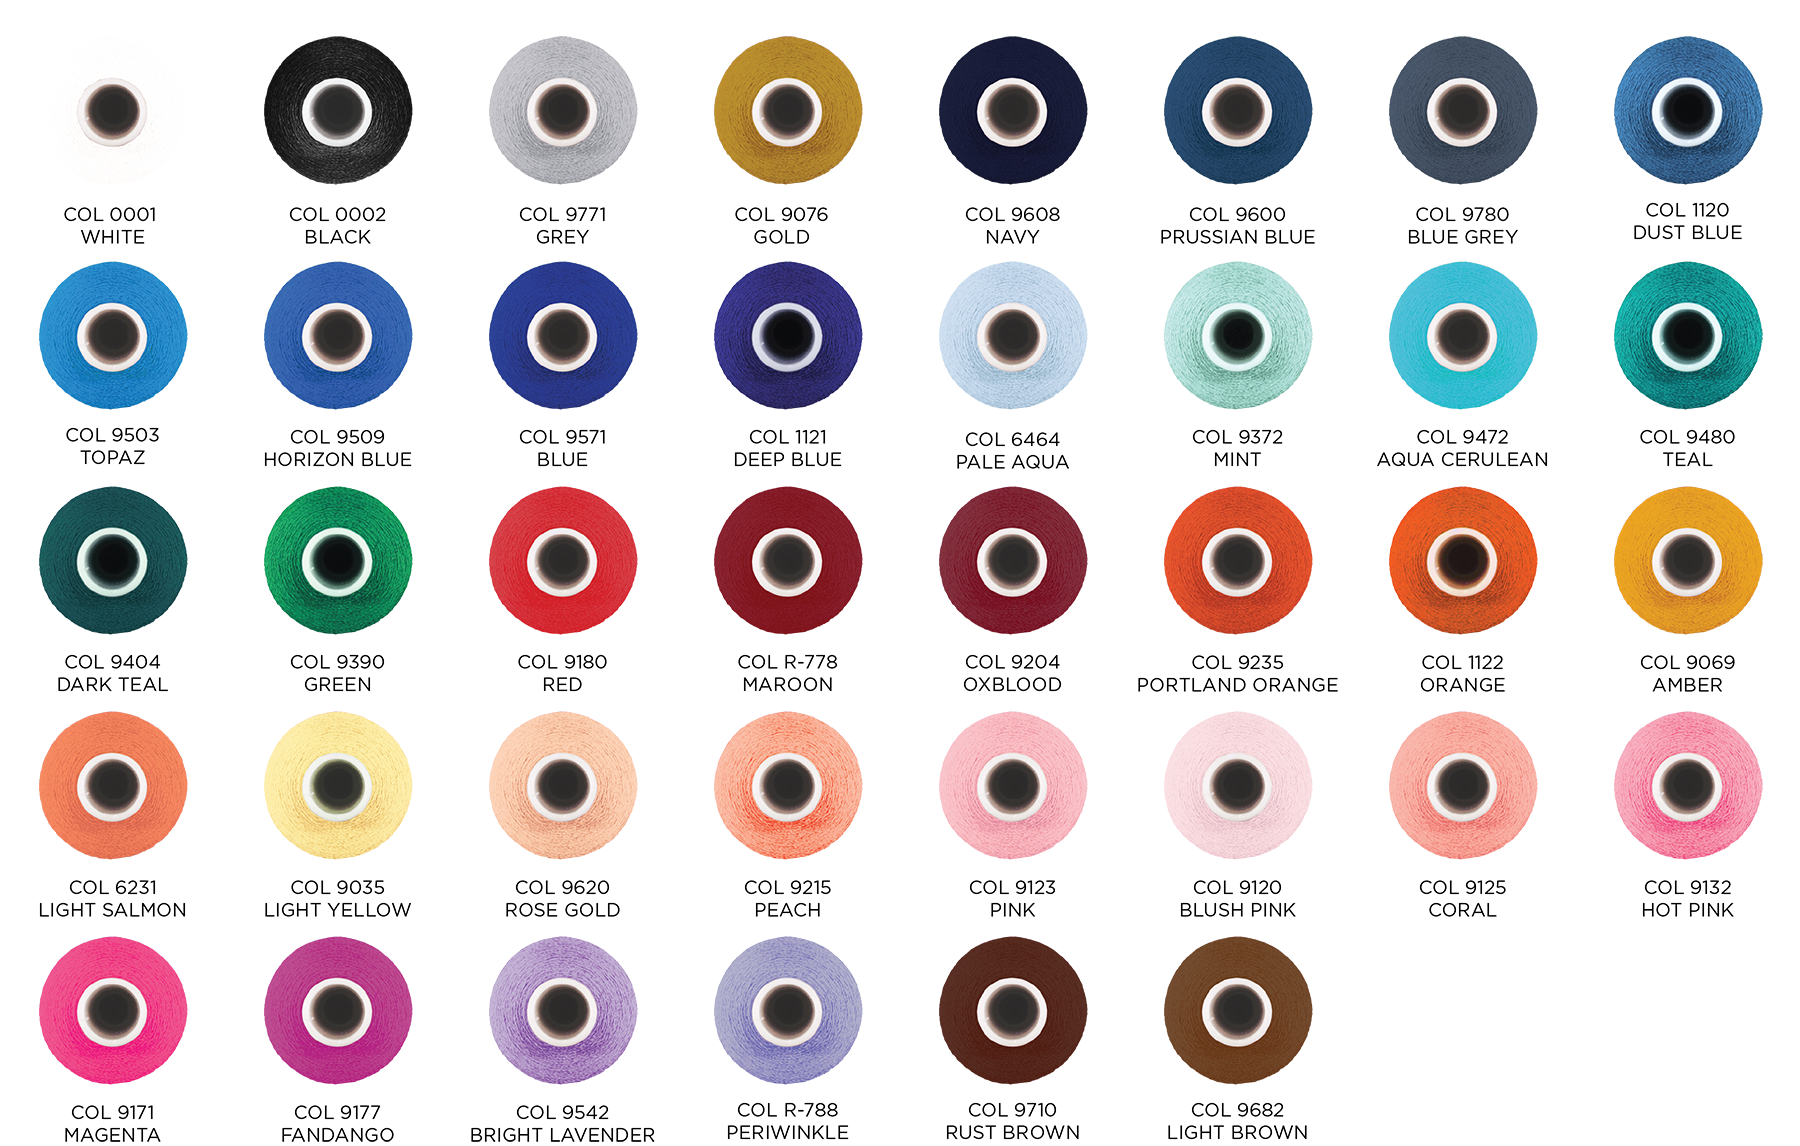 Pocket Square Clothing Embroidery Thread Color Options